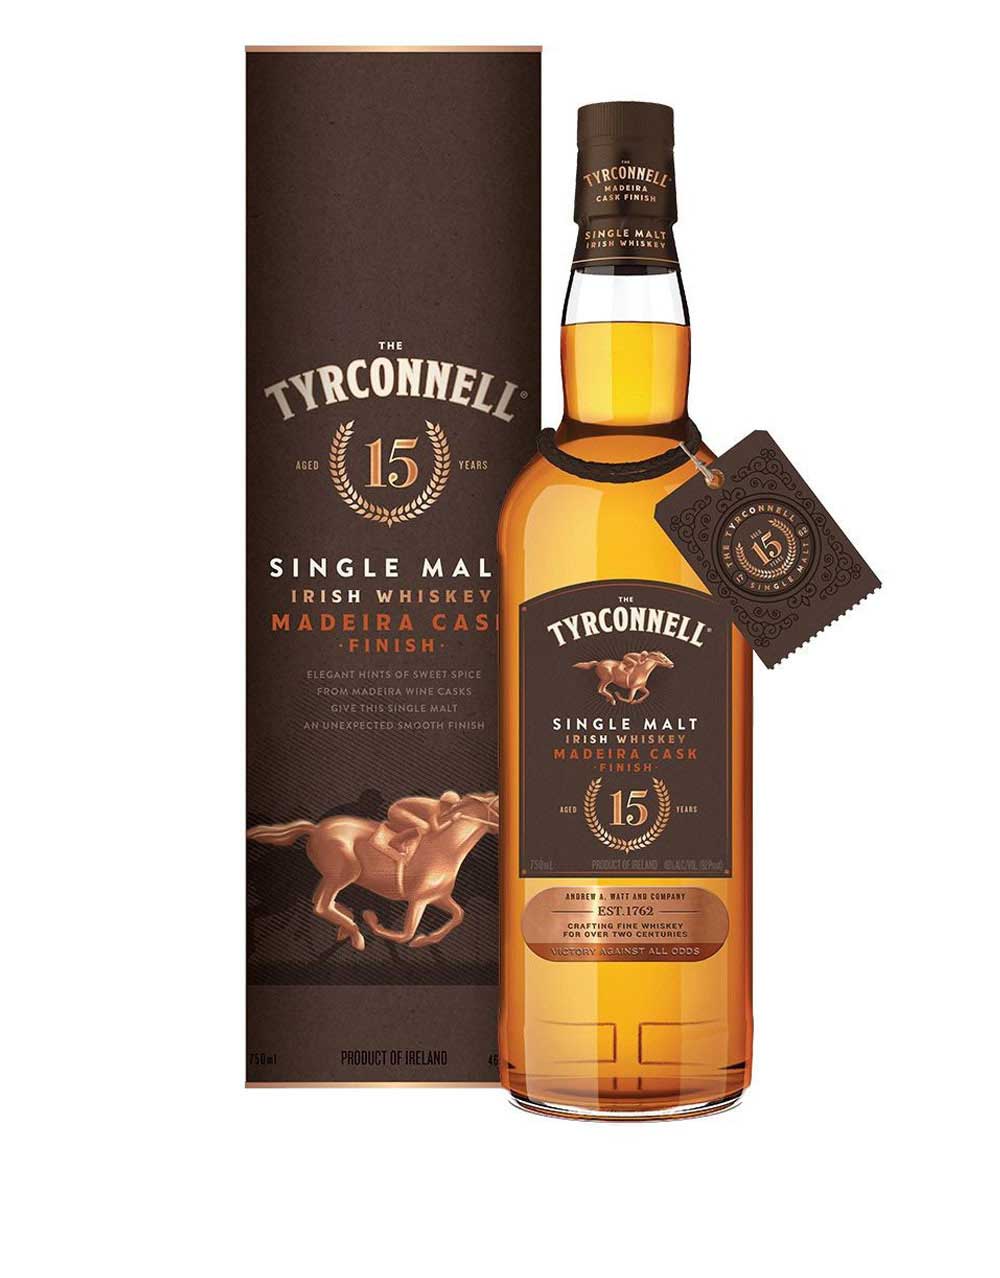 The Tyrconnell 15 Year Madeira Cask Finish